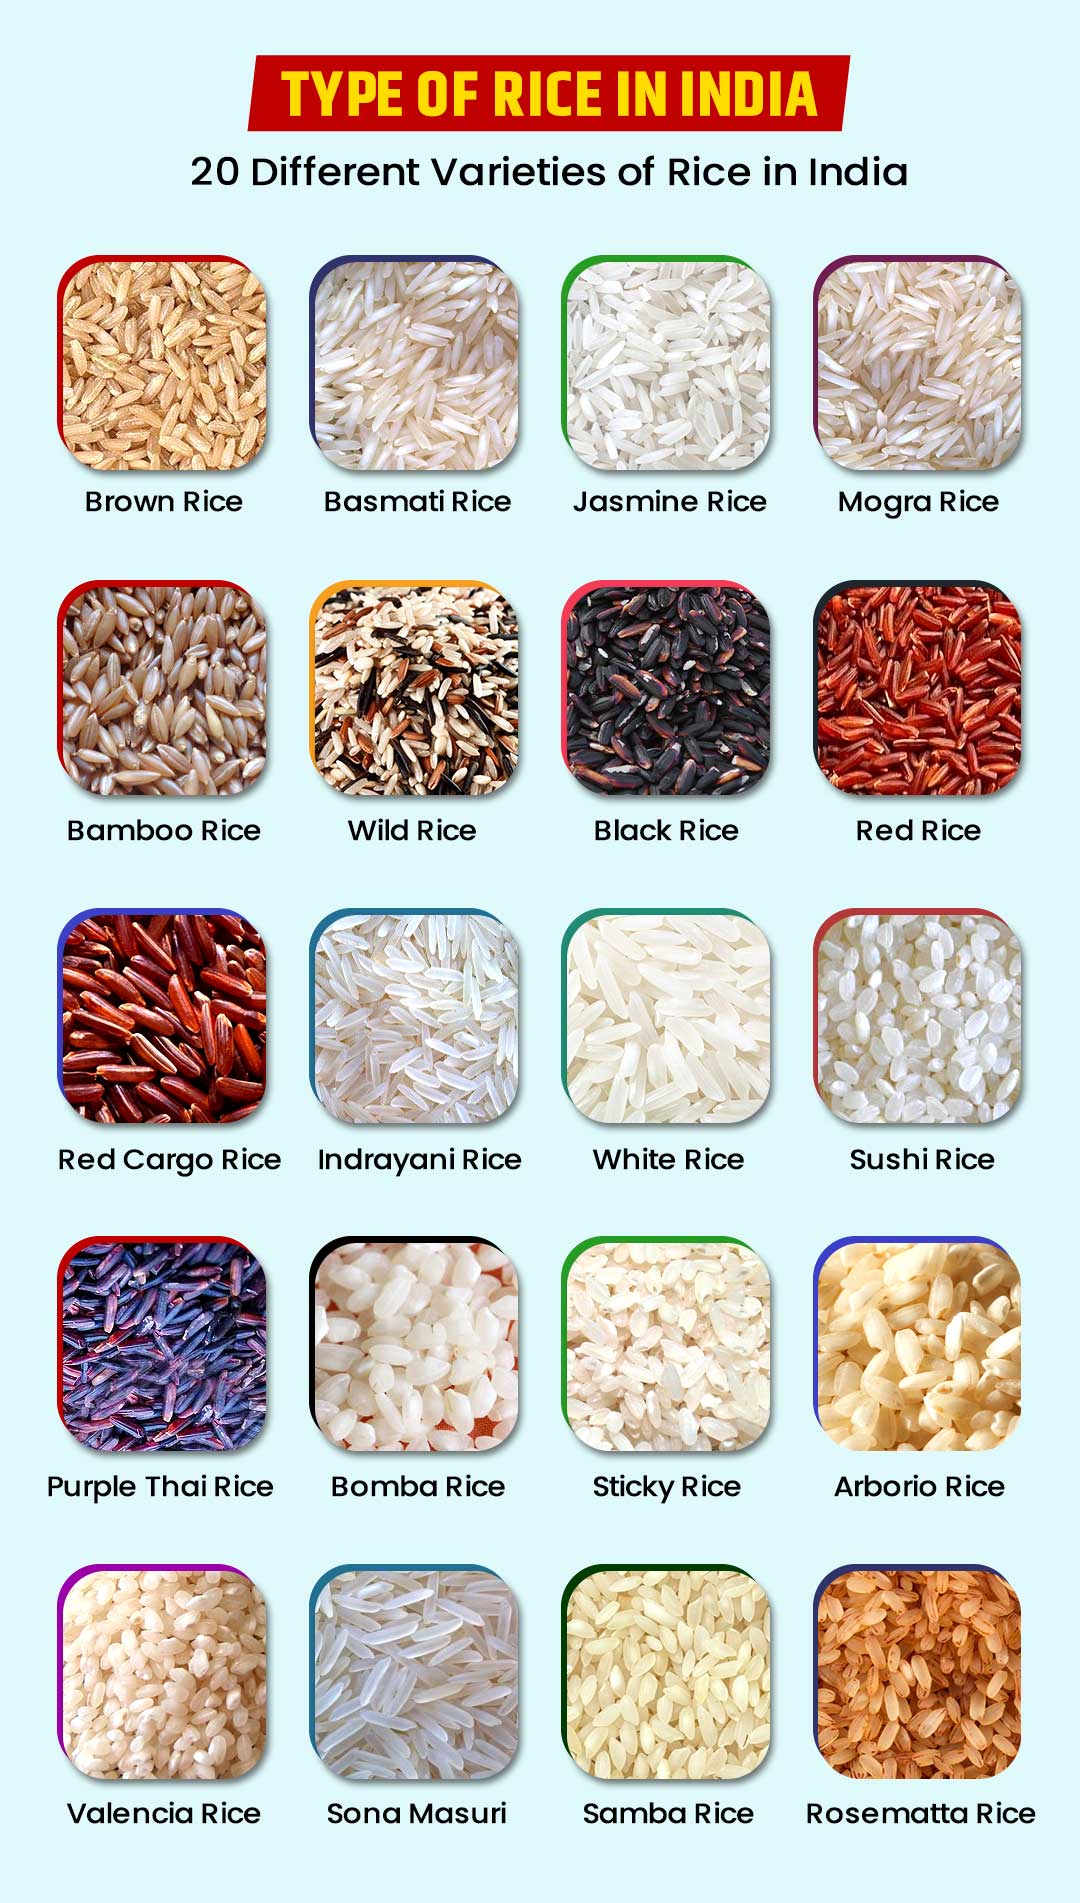 Types of Rice in India